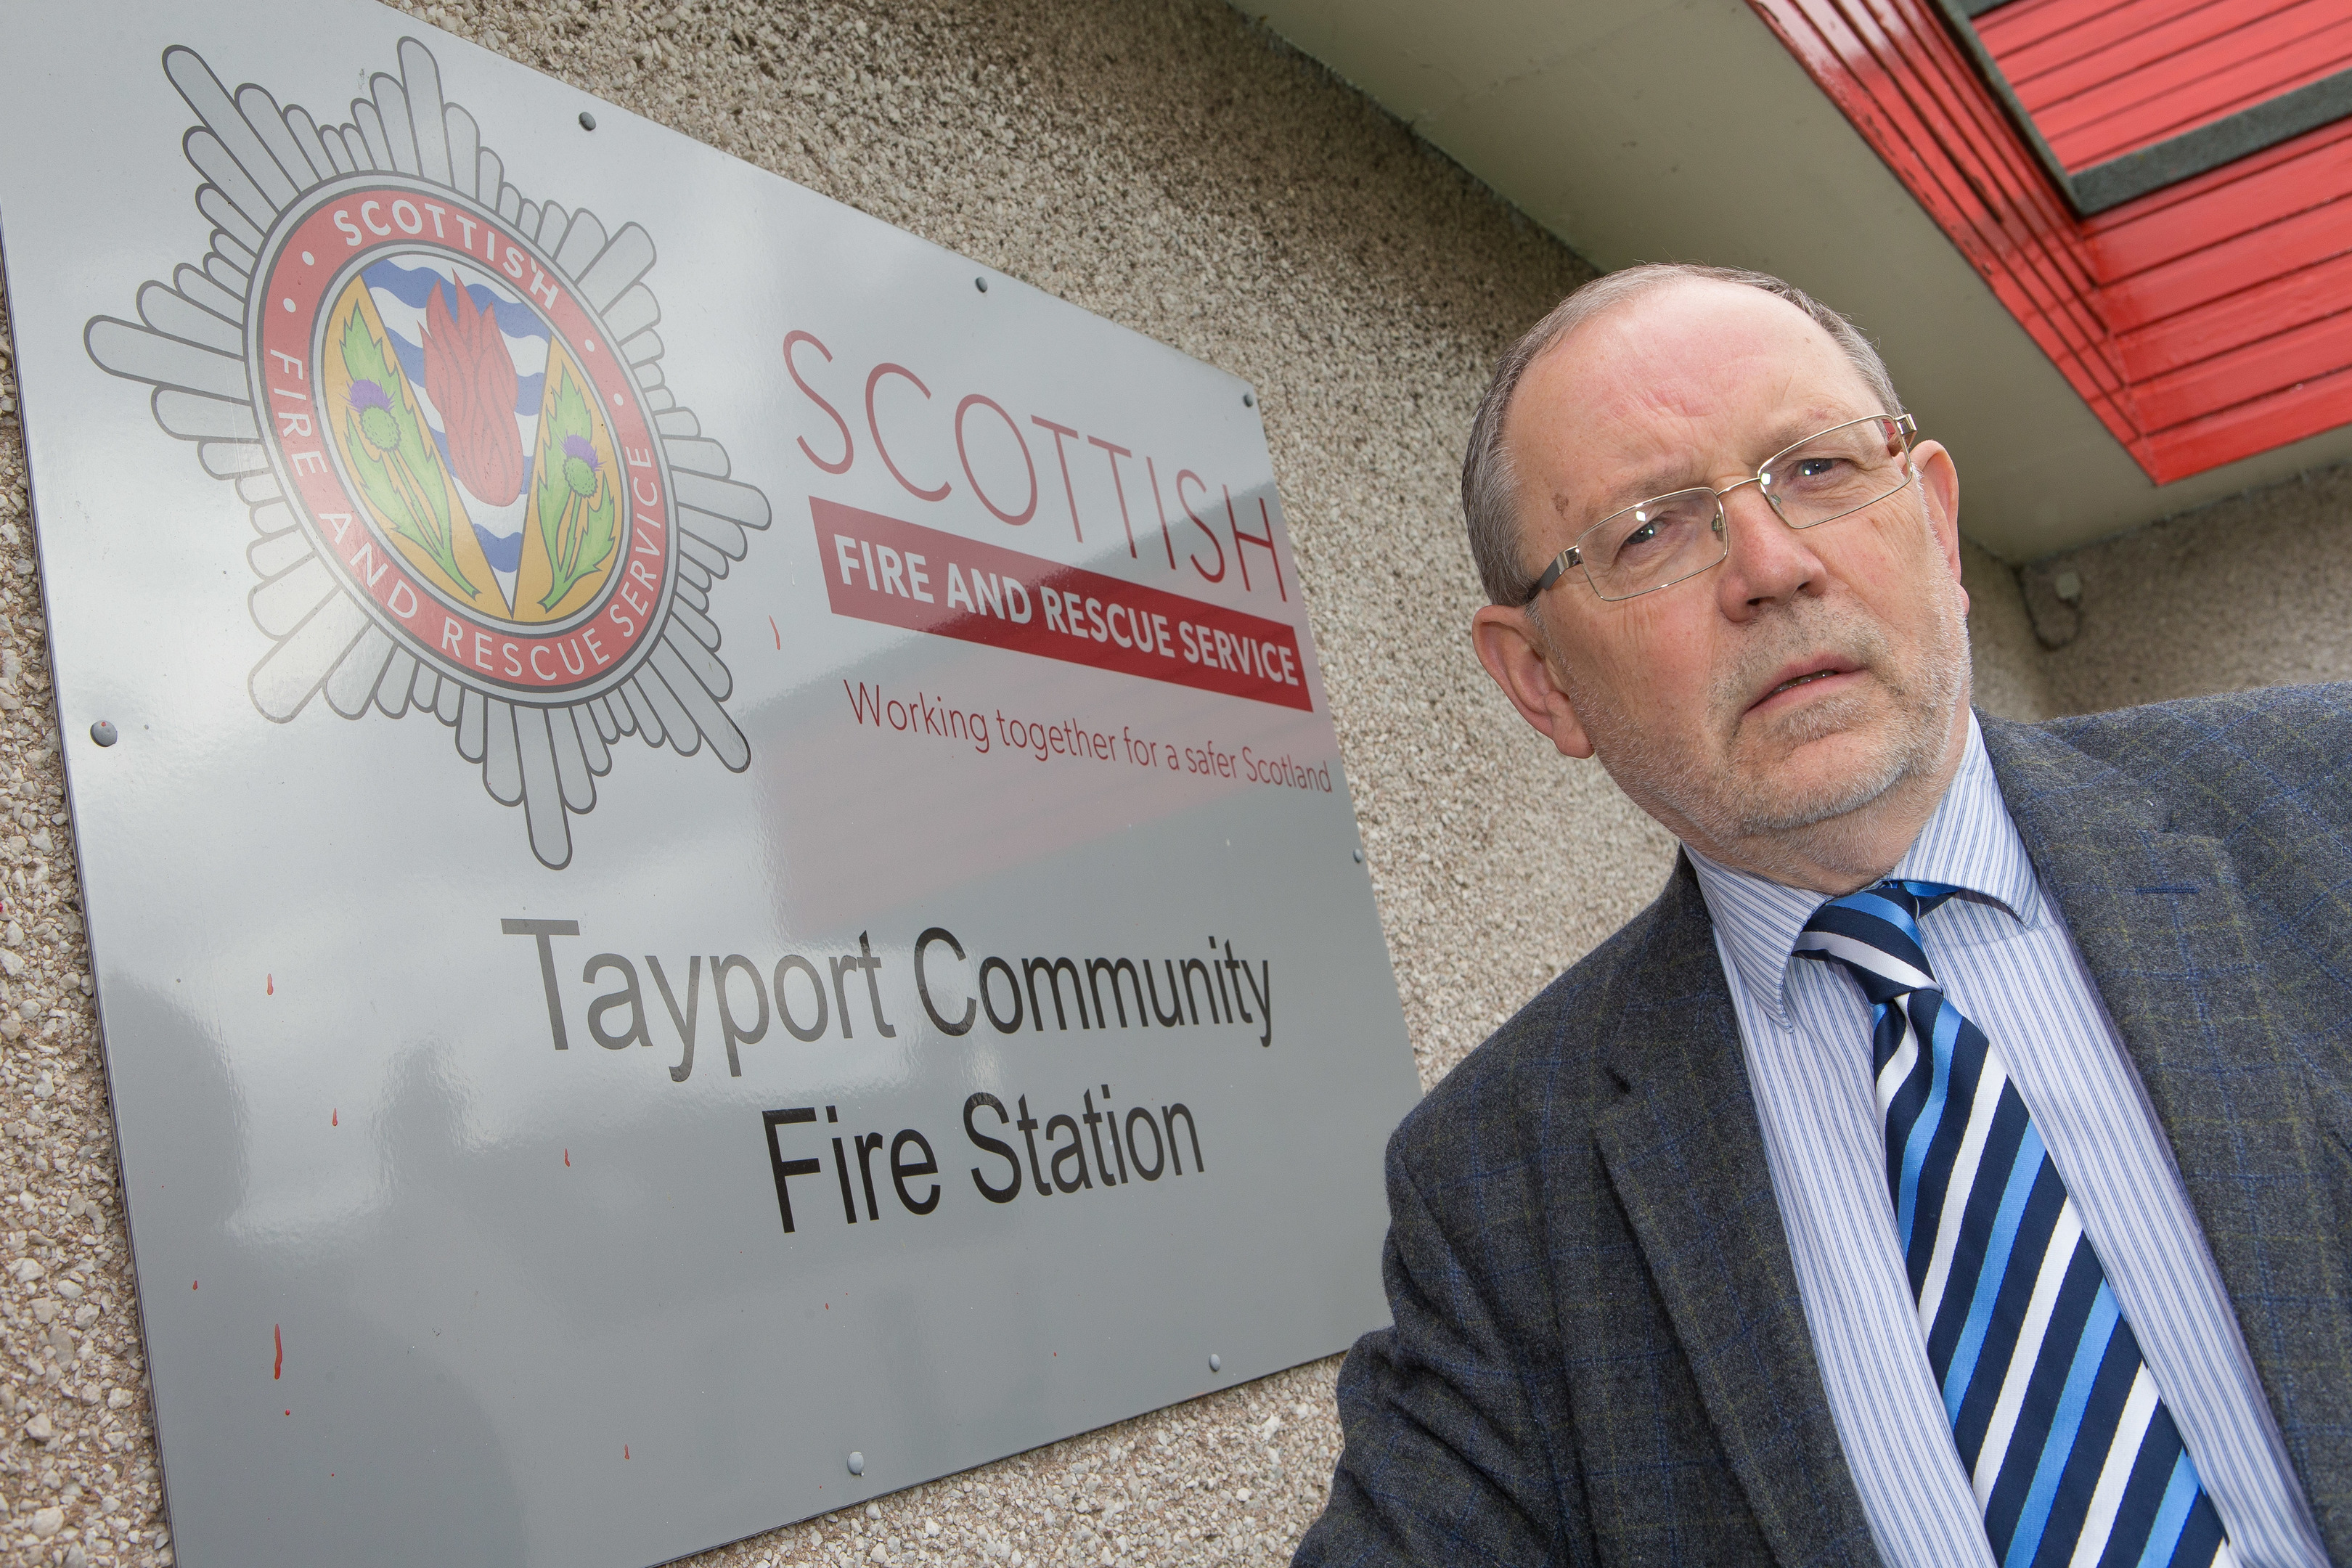 Tim Brett is concerned about the strain false fire alarms are putting on resources in Fife - not to mention the risk to public safety.